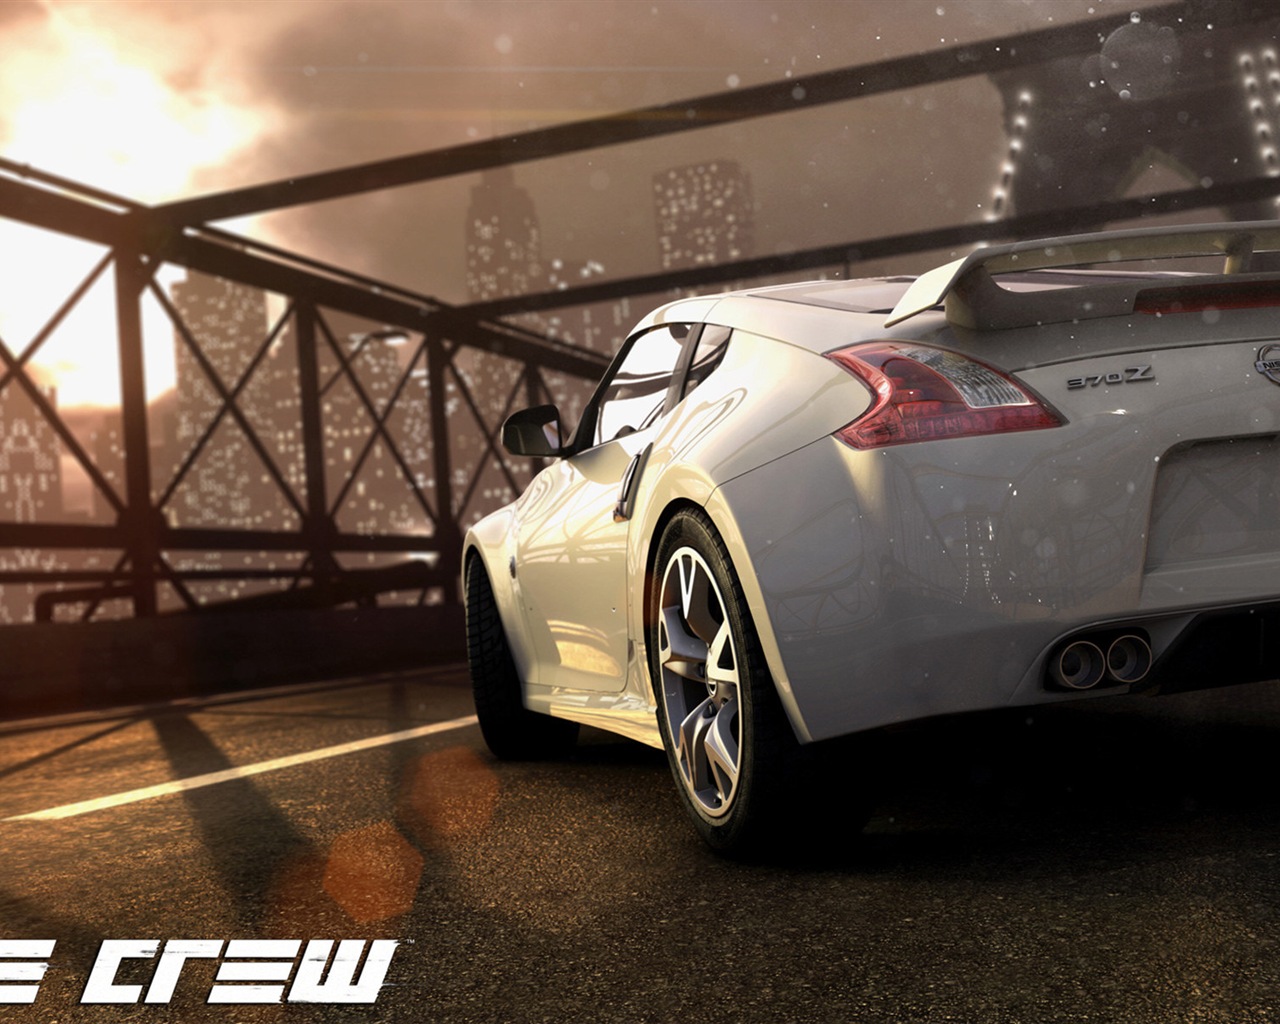 The Crew game HD wallpapers #9 - 1280x1024